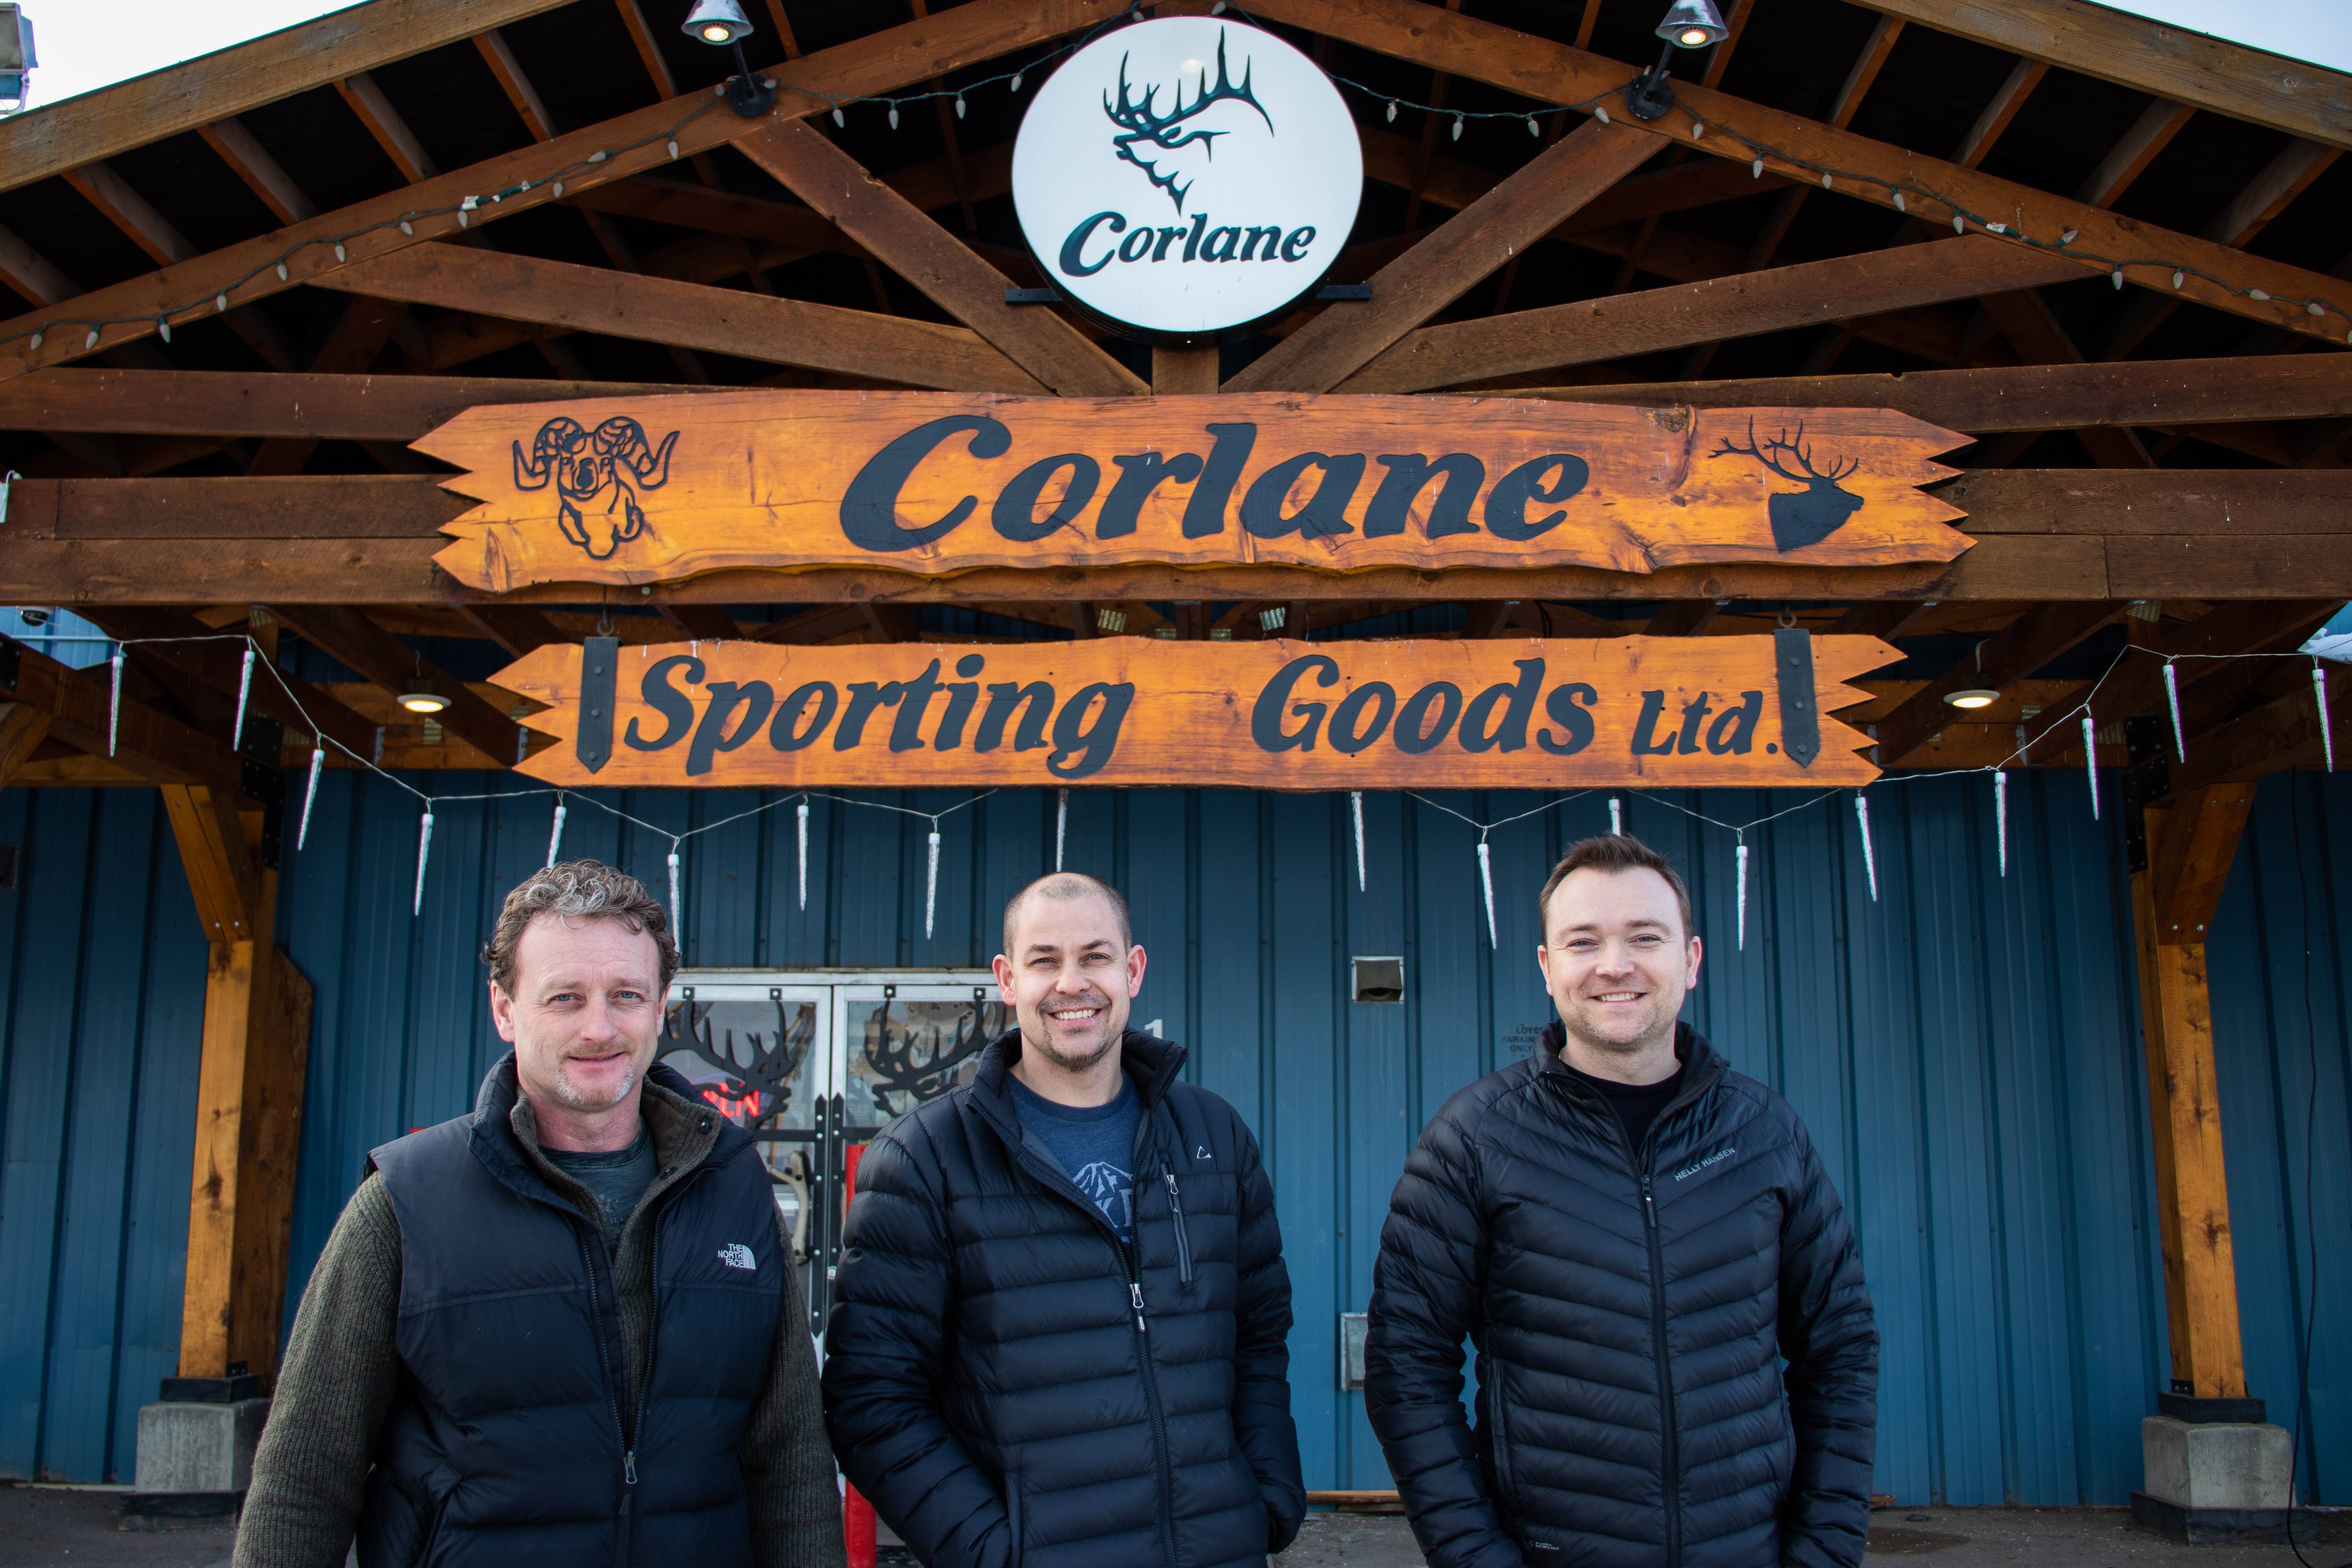 About Corlane Sporting Goods Ltd